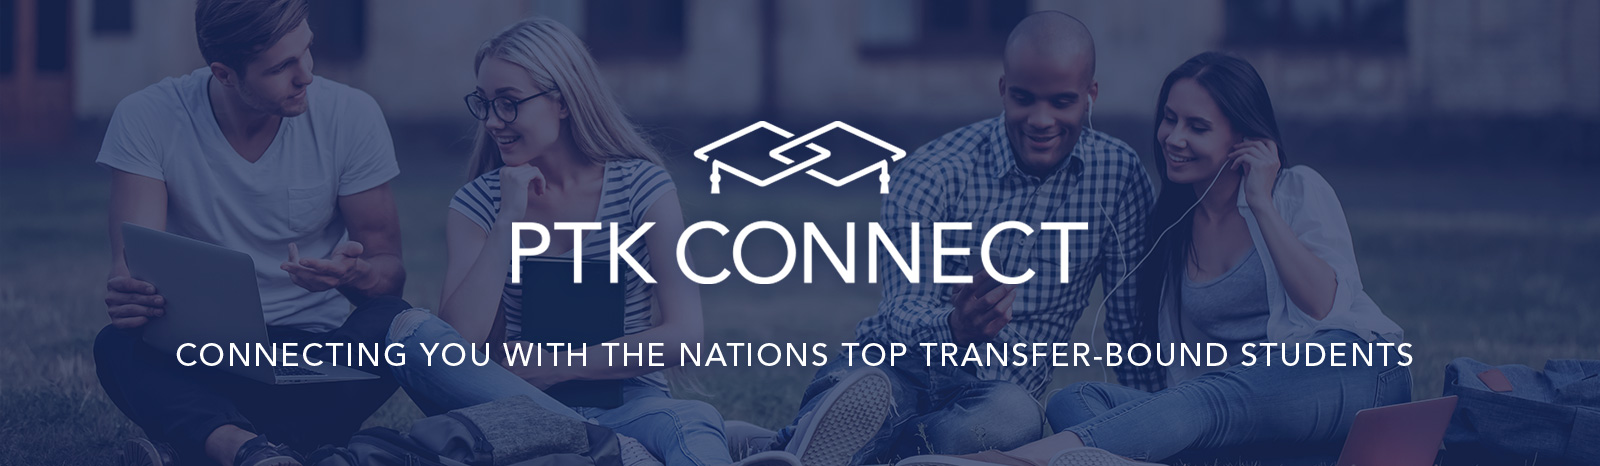 PTK Connect